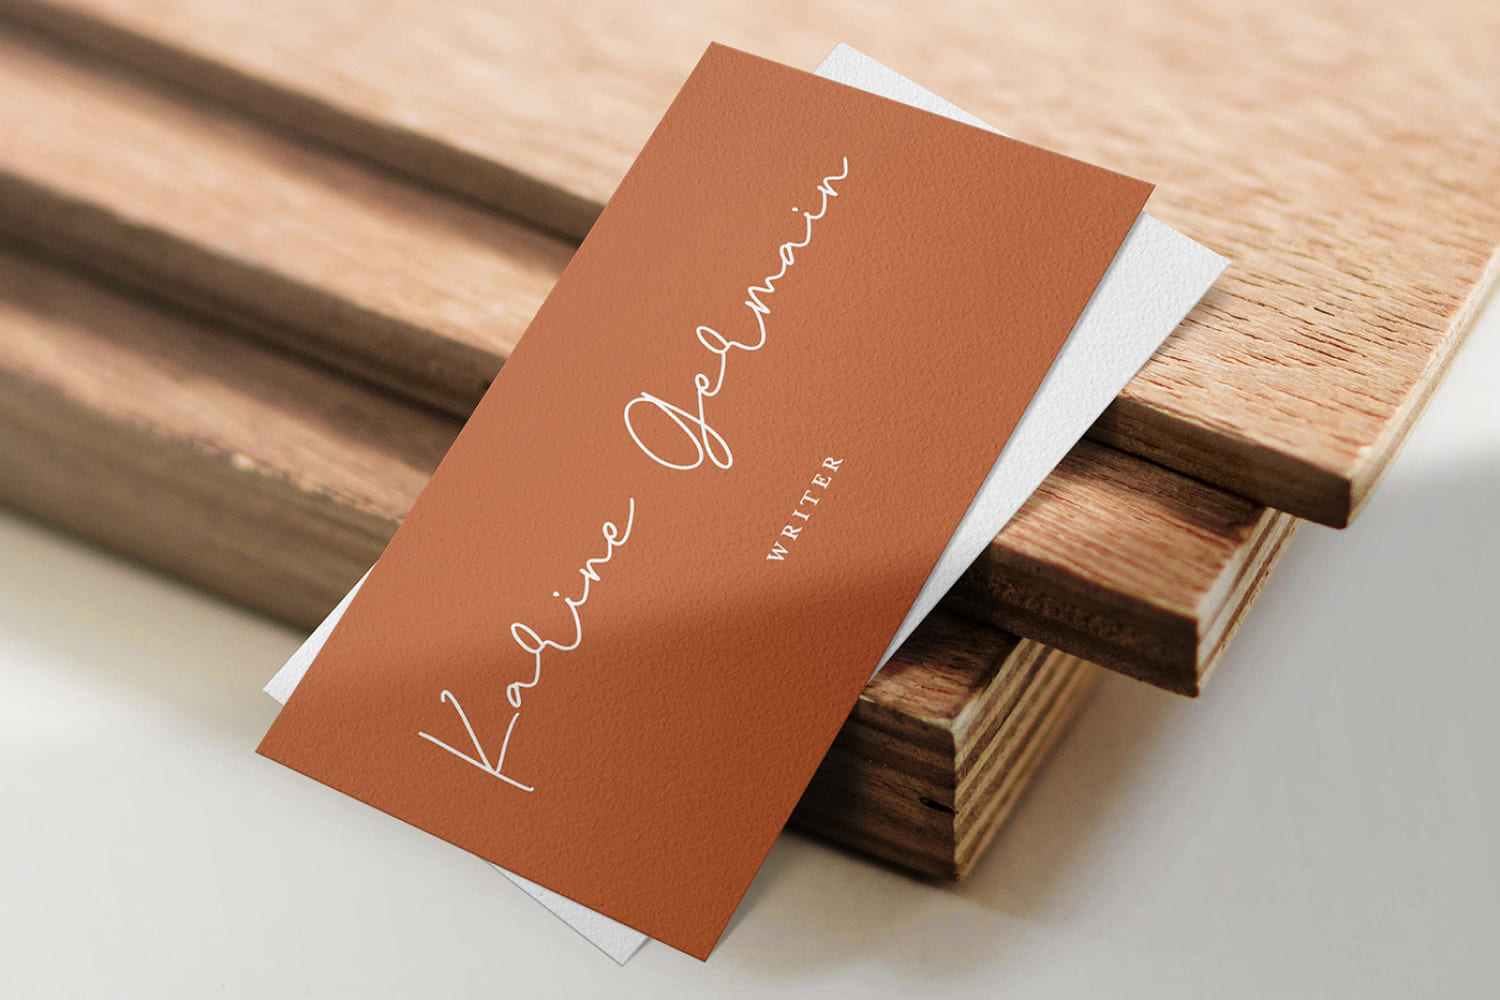 Photo of a brown business card on the background of boards and handwritten text.